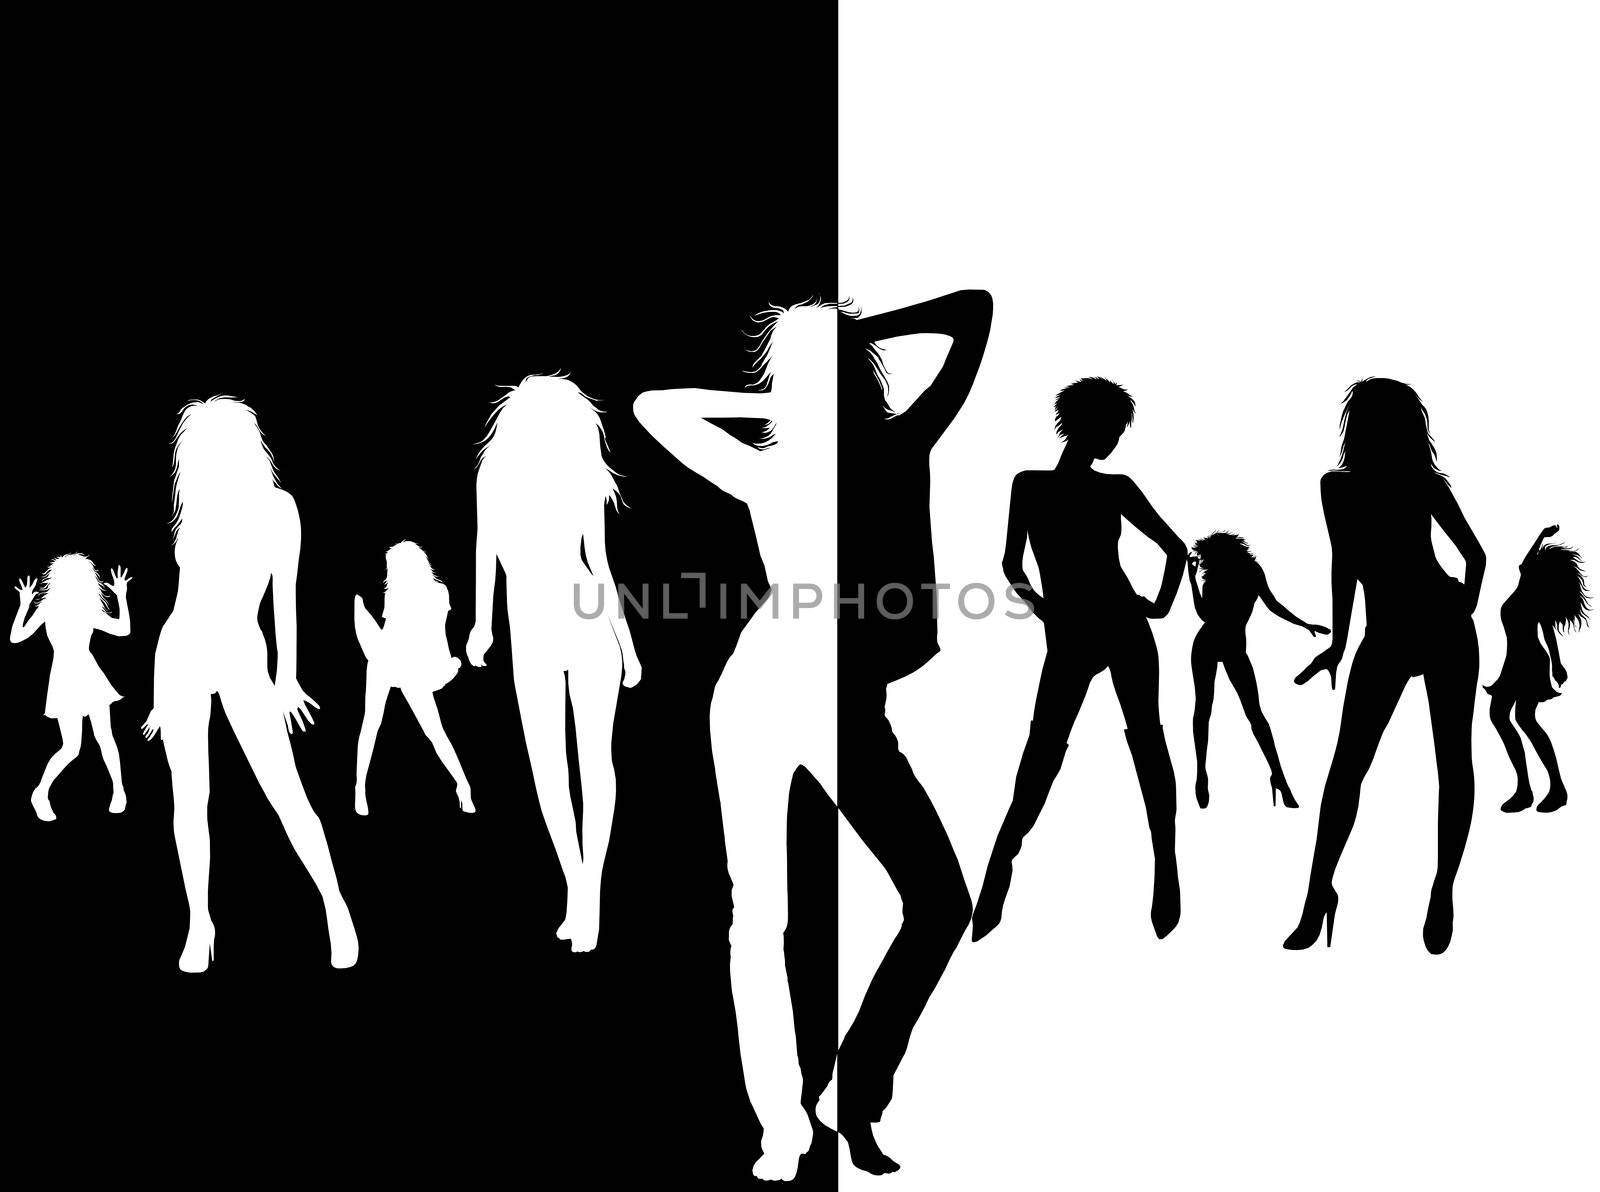 women silhouettes black and white by peromarketing